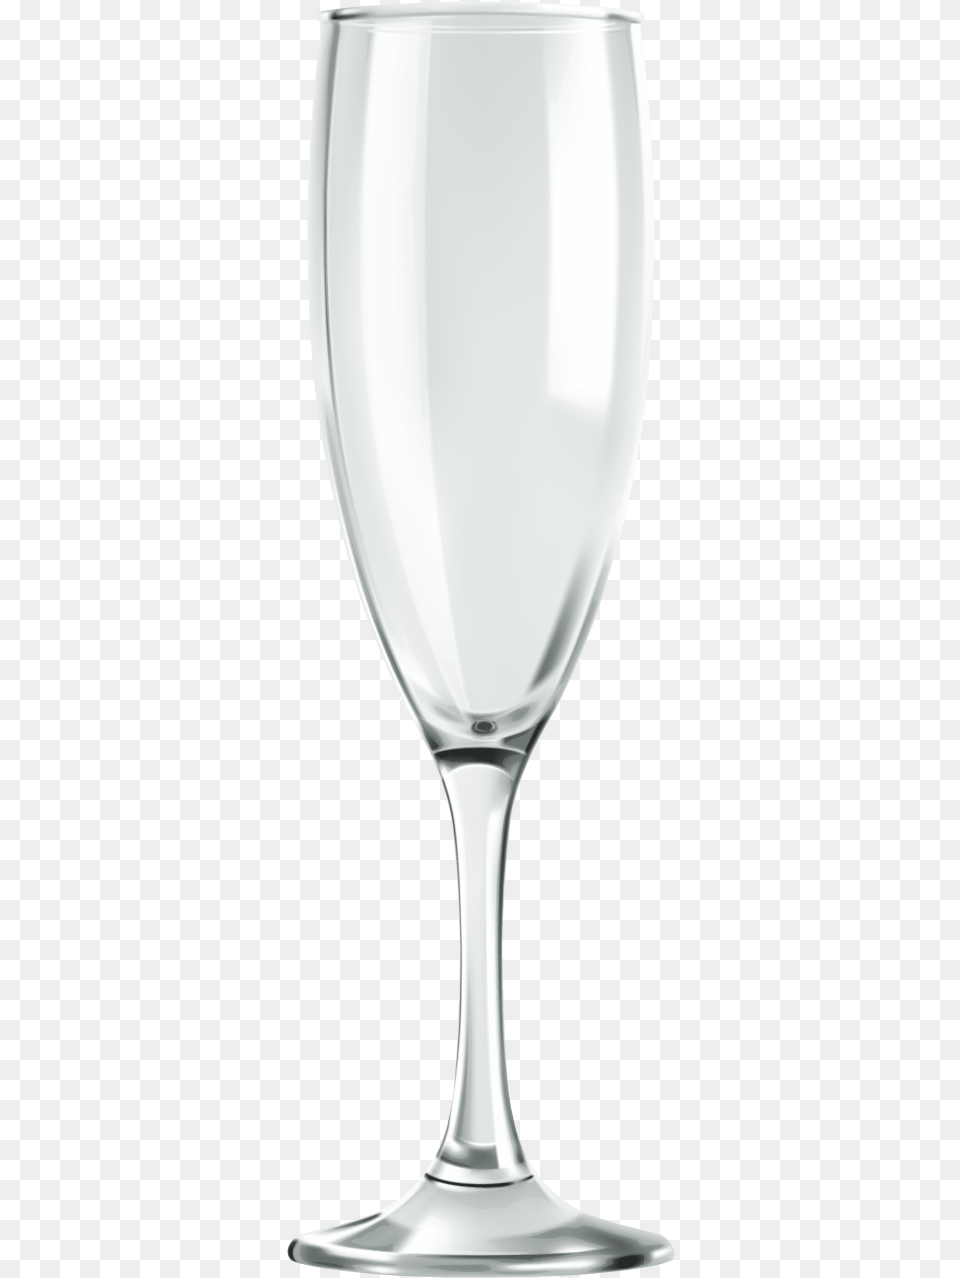 This File Is About Champagne Glass Champagne Stemware, Alcohol, Beverage, Goblet, Liquor Png